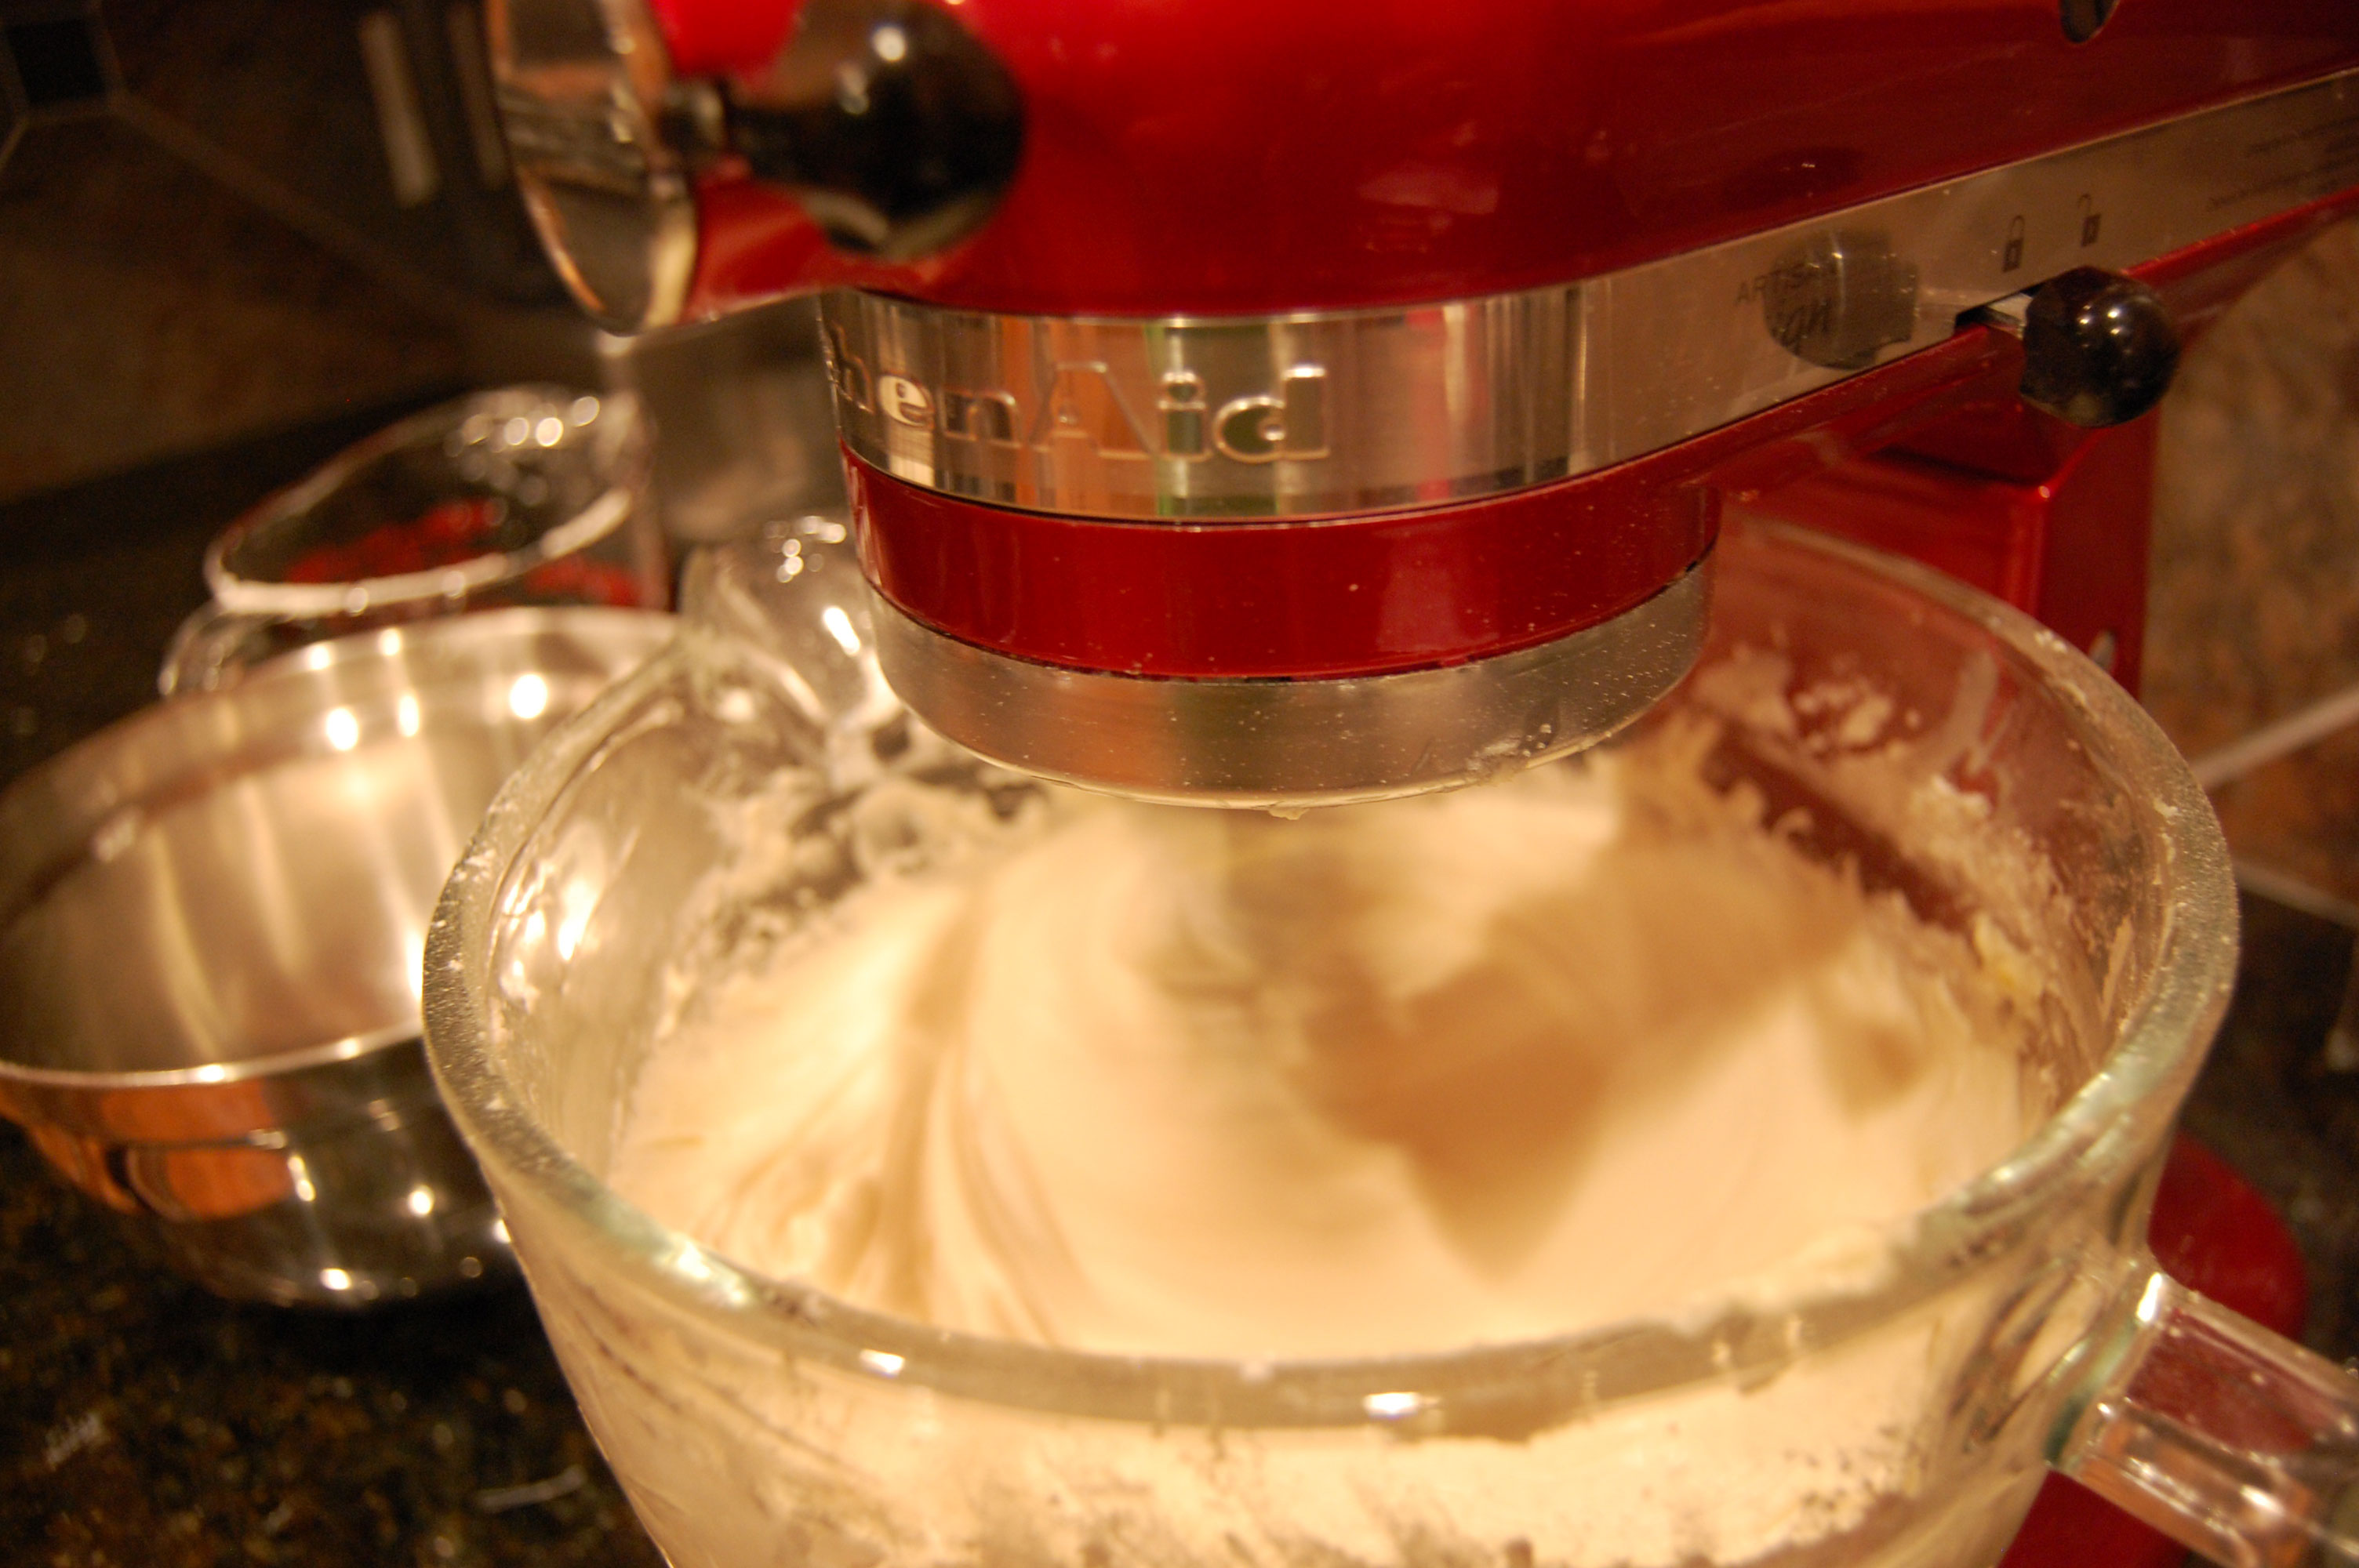 Mixing the Pineapple Upside Down Cake Batter in KitchenAid